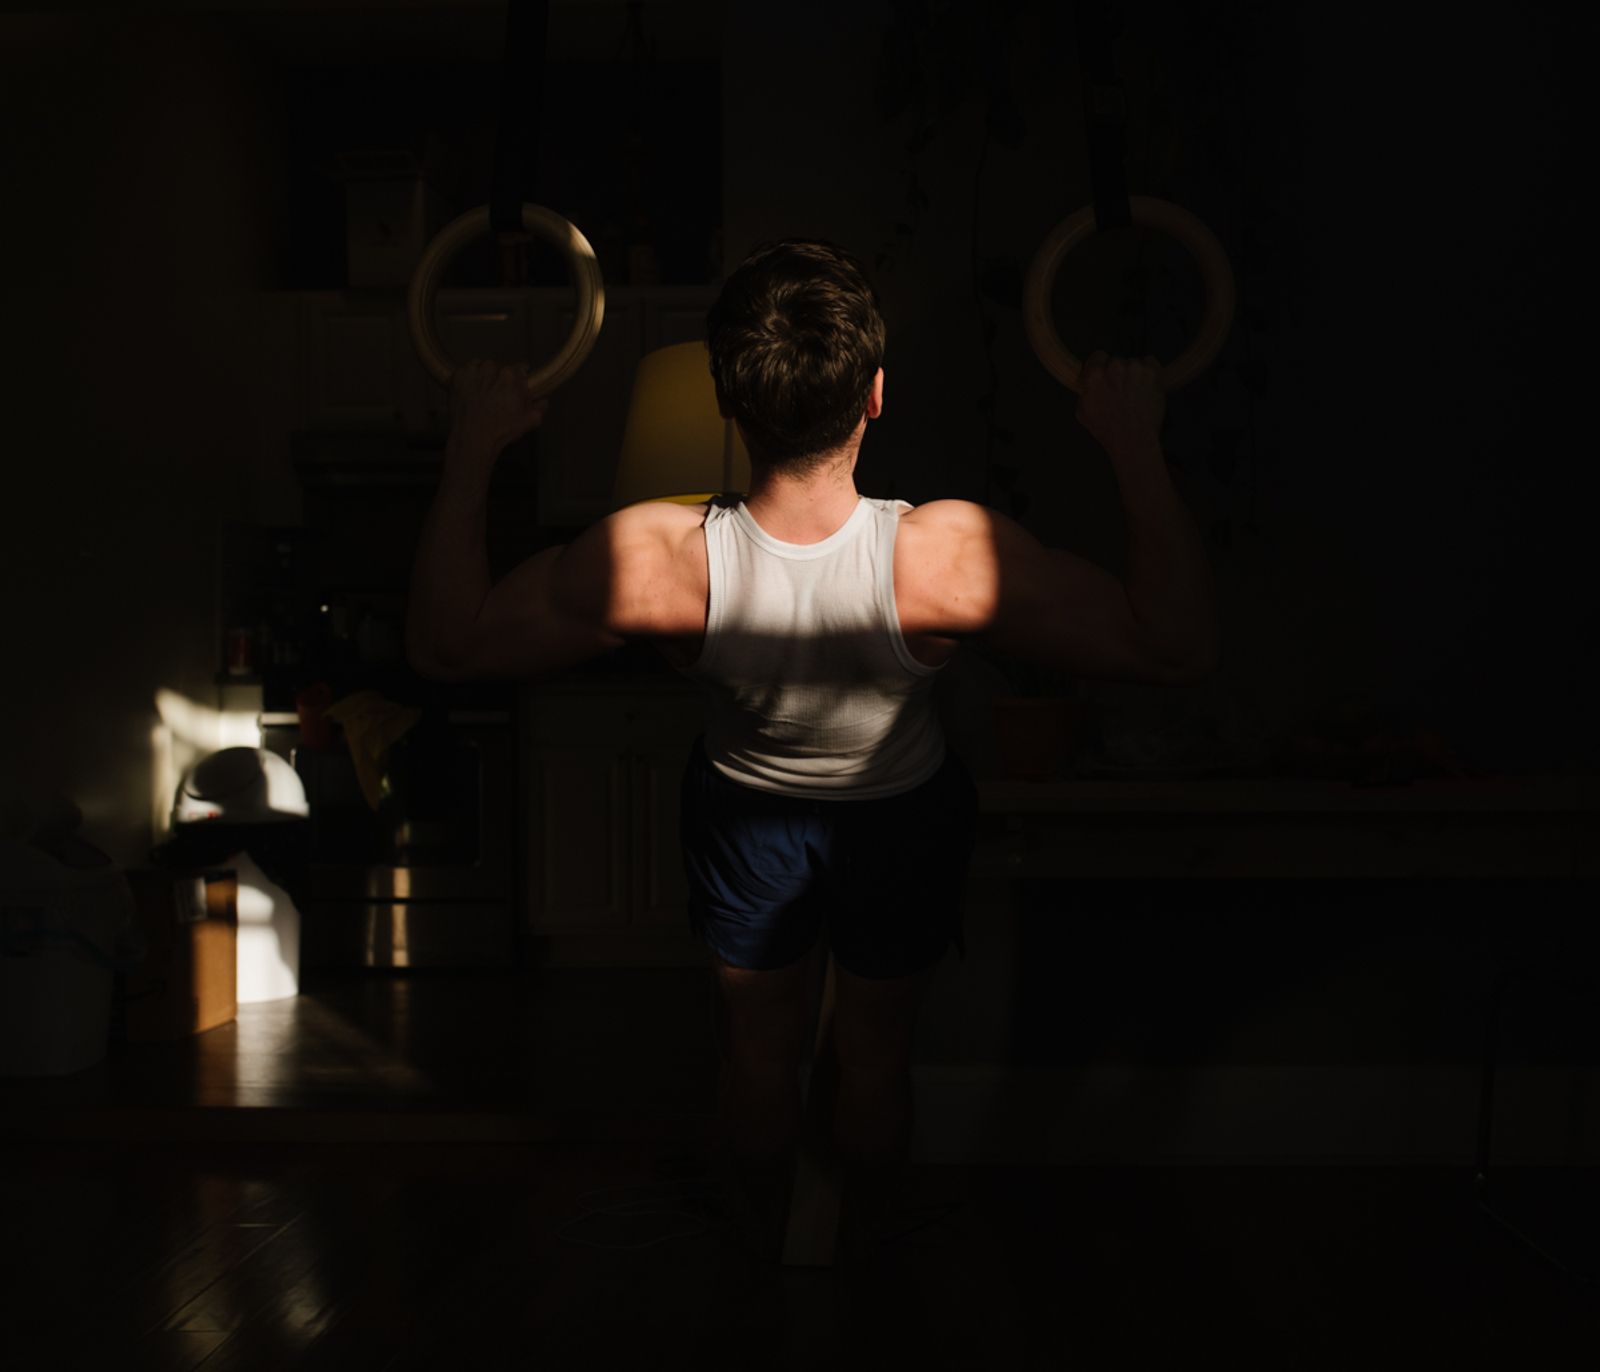 © Gili Benita - Sam (24) works out at the living room inside the Ridgewood apartment, NYC, April 21st, 2020.